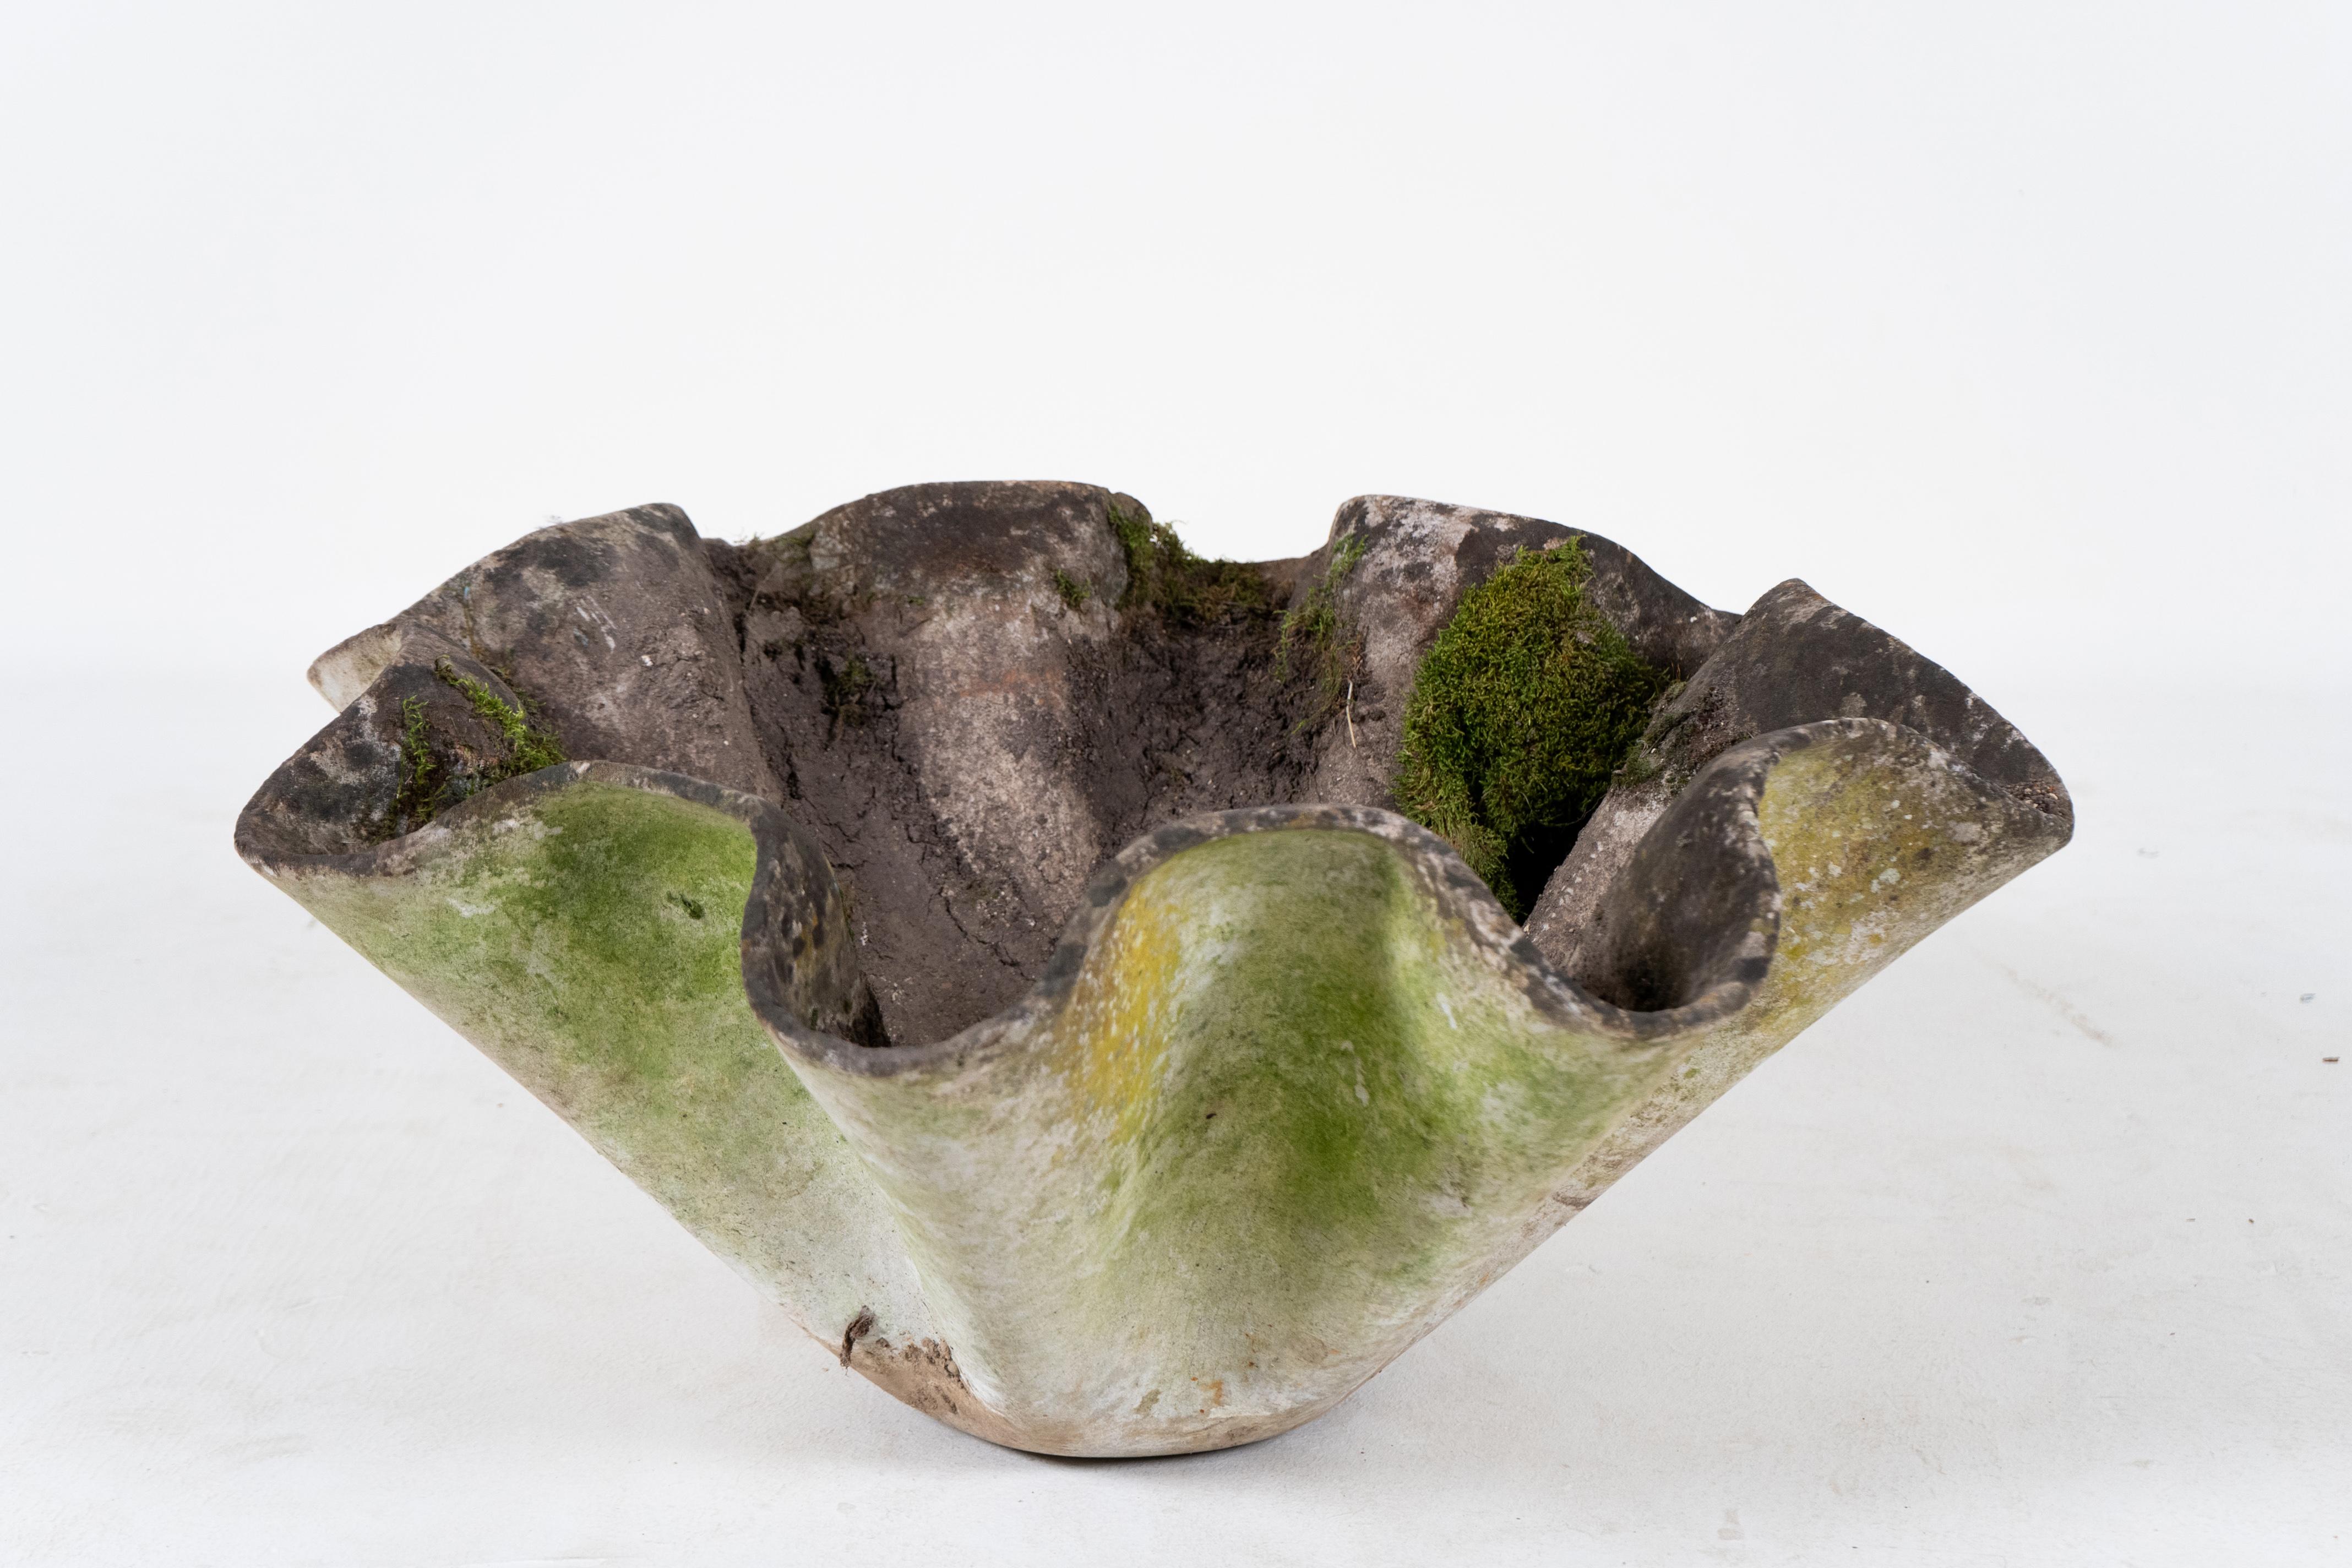 A large, exceptional garden planter designed by Willy Guhl for Eternit in Switzerland circa 1960, known as a biomorphic or 'Clam Shell' planter. Resembling the architect's iconic elephant ear planters, this planter is made from fibrous cement that